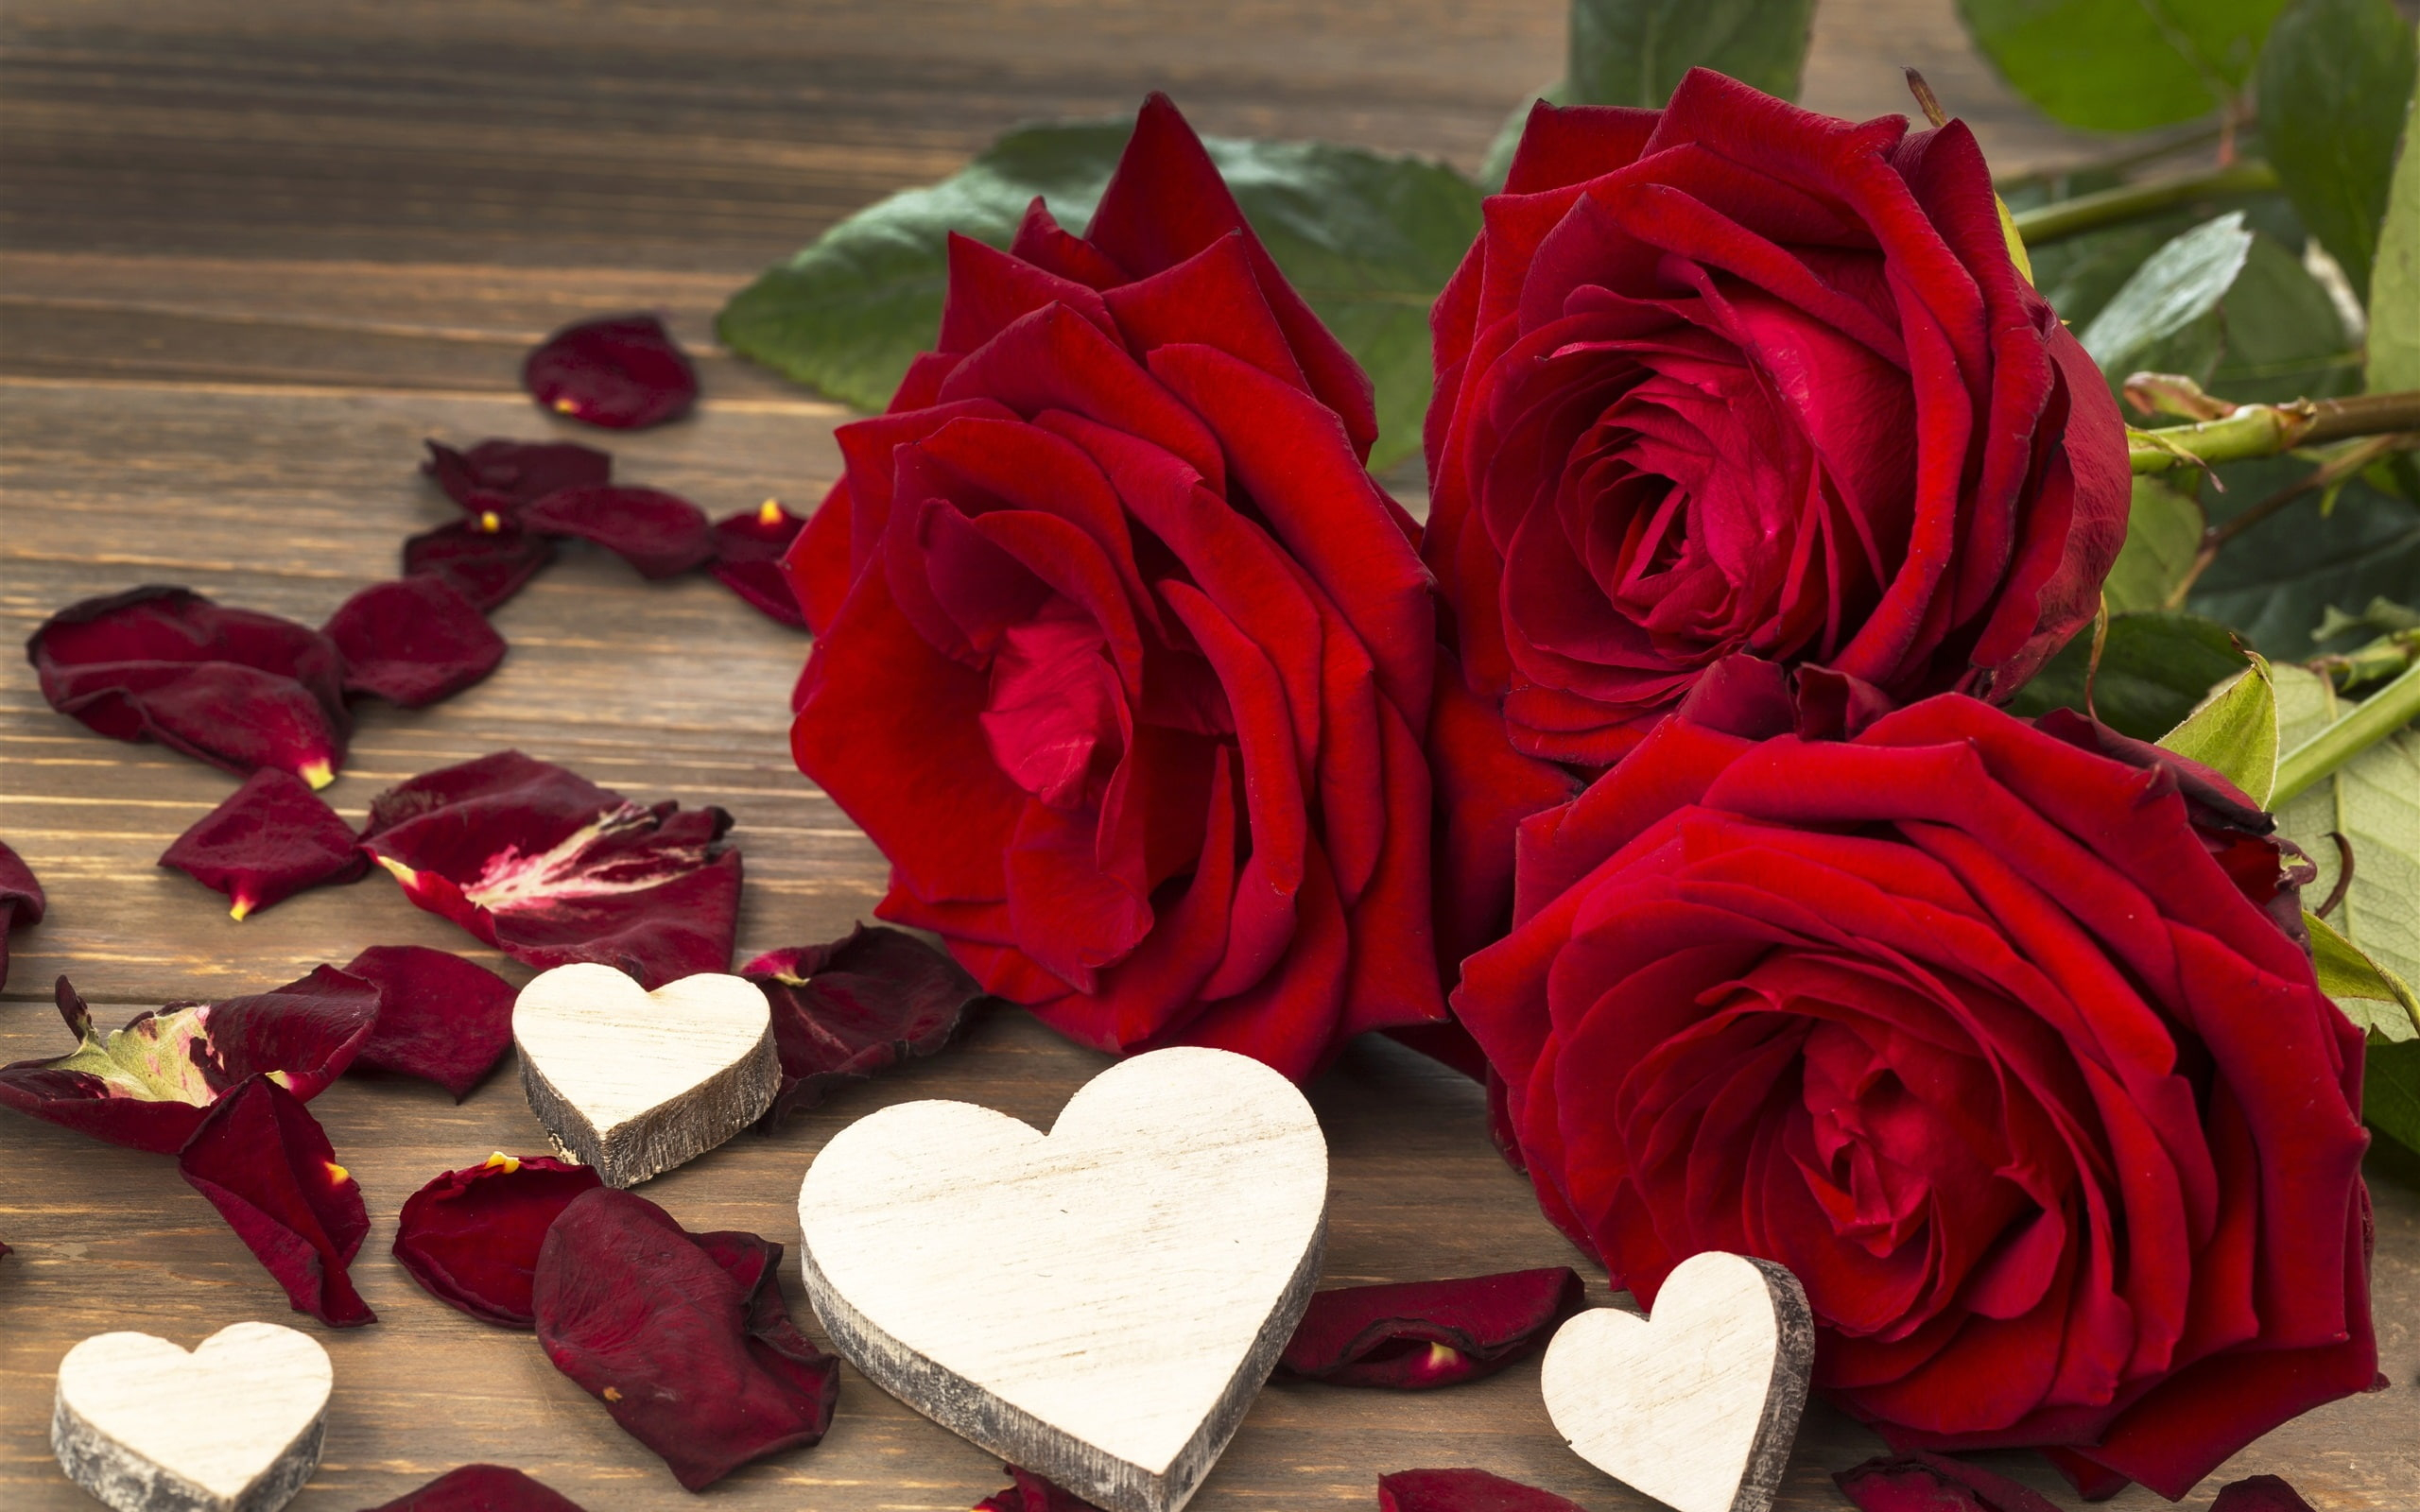 Red rose, flowers, love, Valentine's day, three red flowers wallpaper